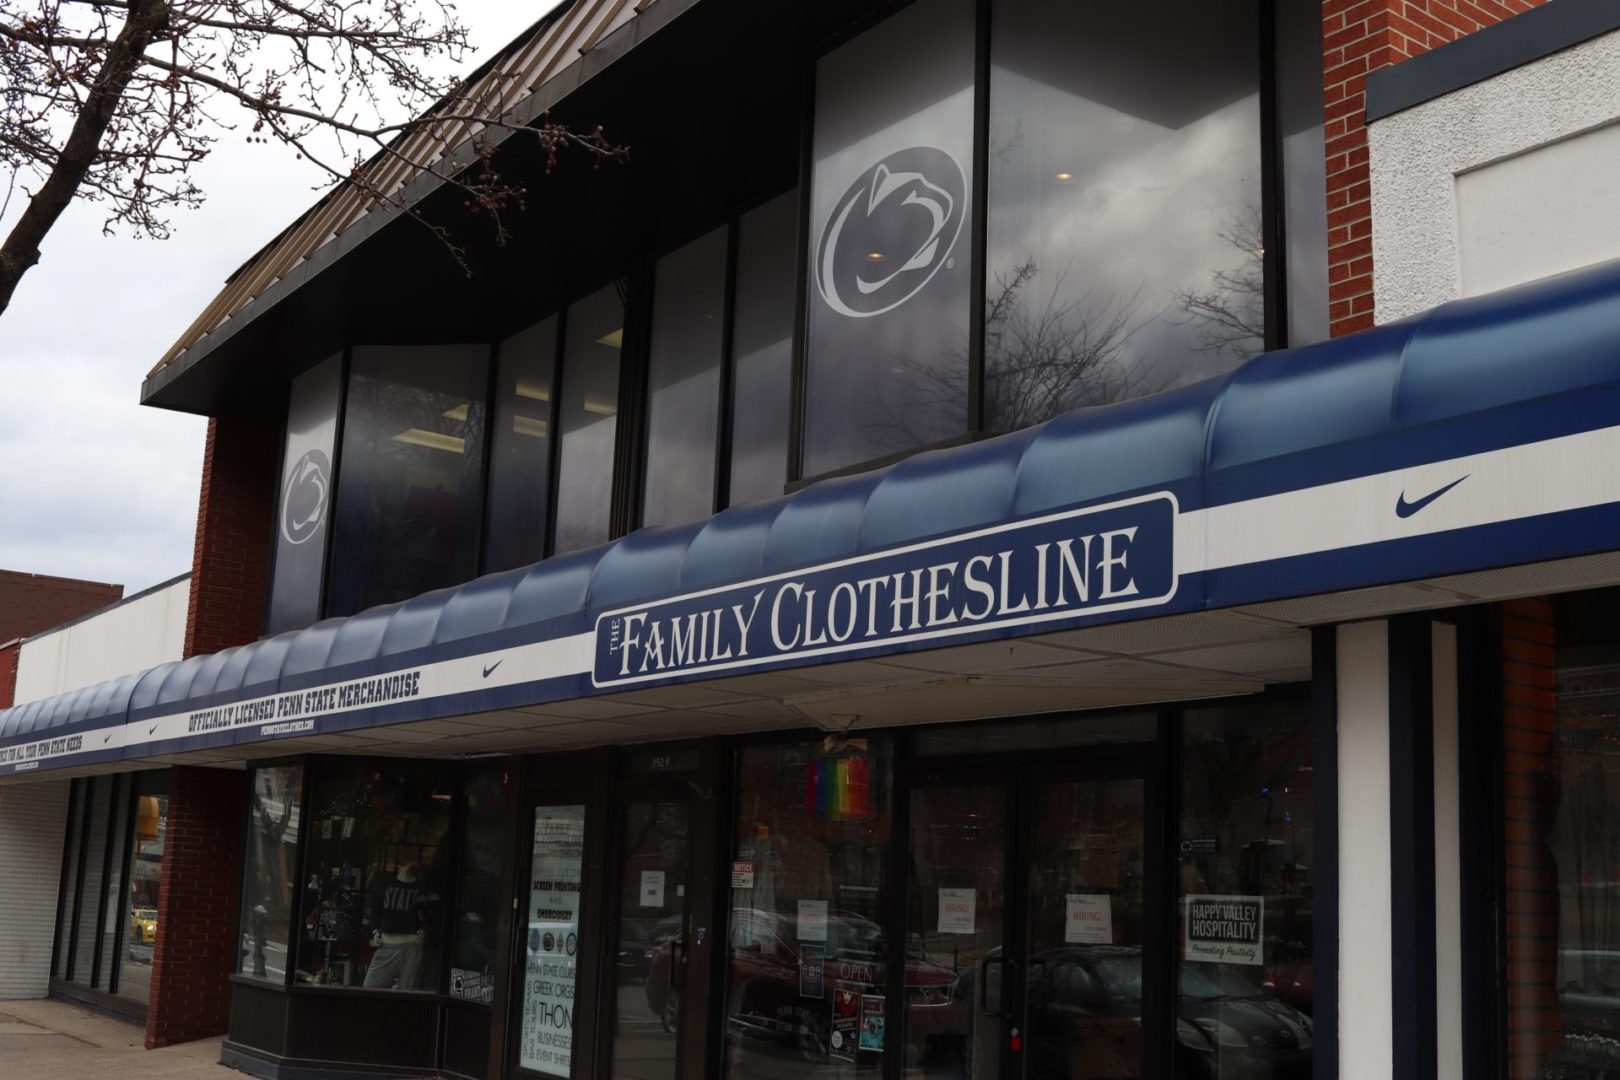 Lululemon to Launch Licensed Penn State Apparel at Family Clothesline